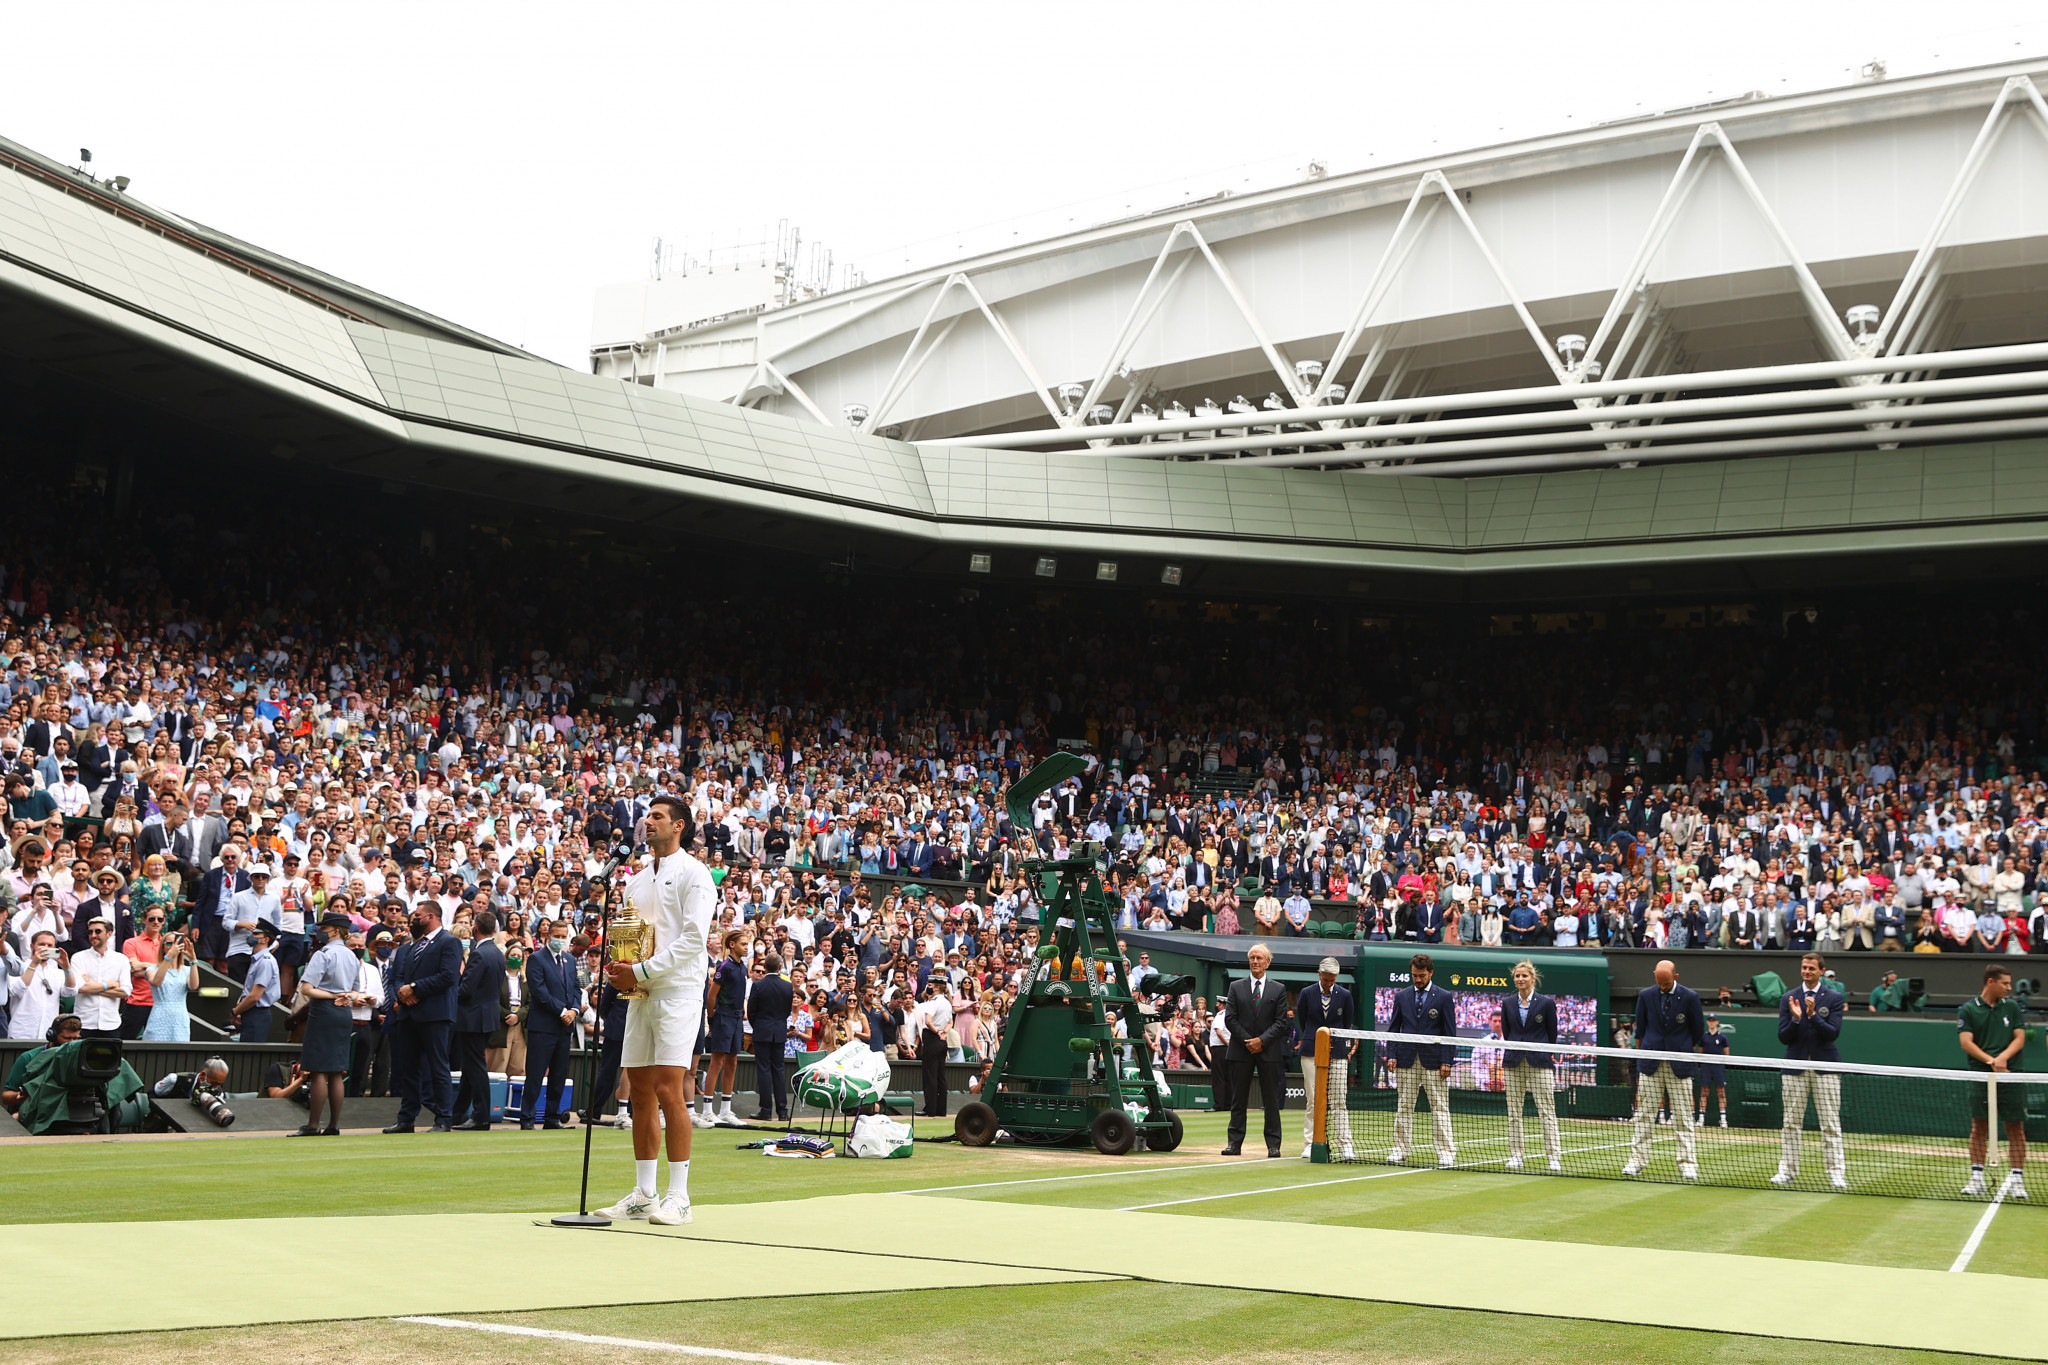 Wimbledon and the AELTC have been criticised for being elitist and lacking diversity ©Getty Images